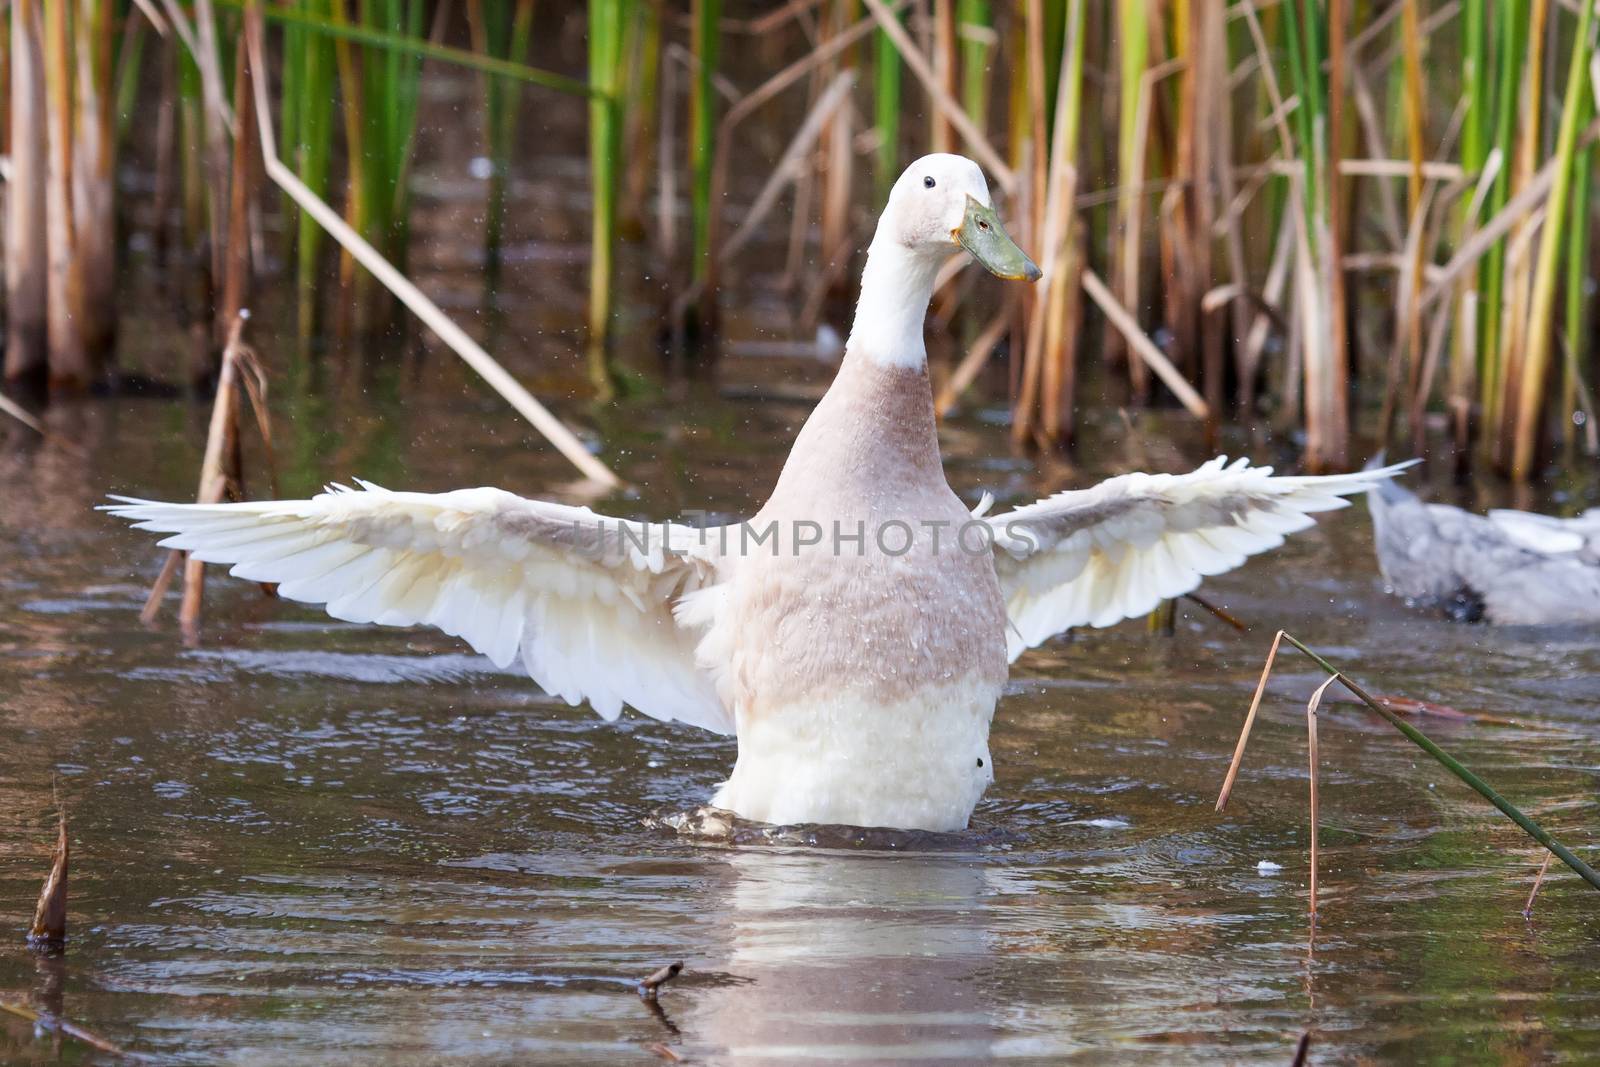 White duck with green bill splashing in the water by Coffee999